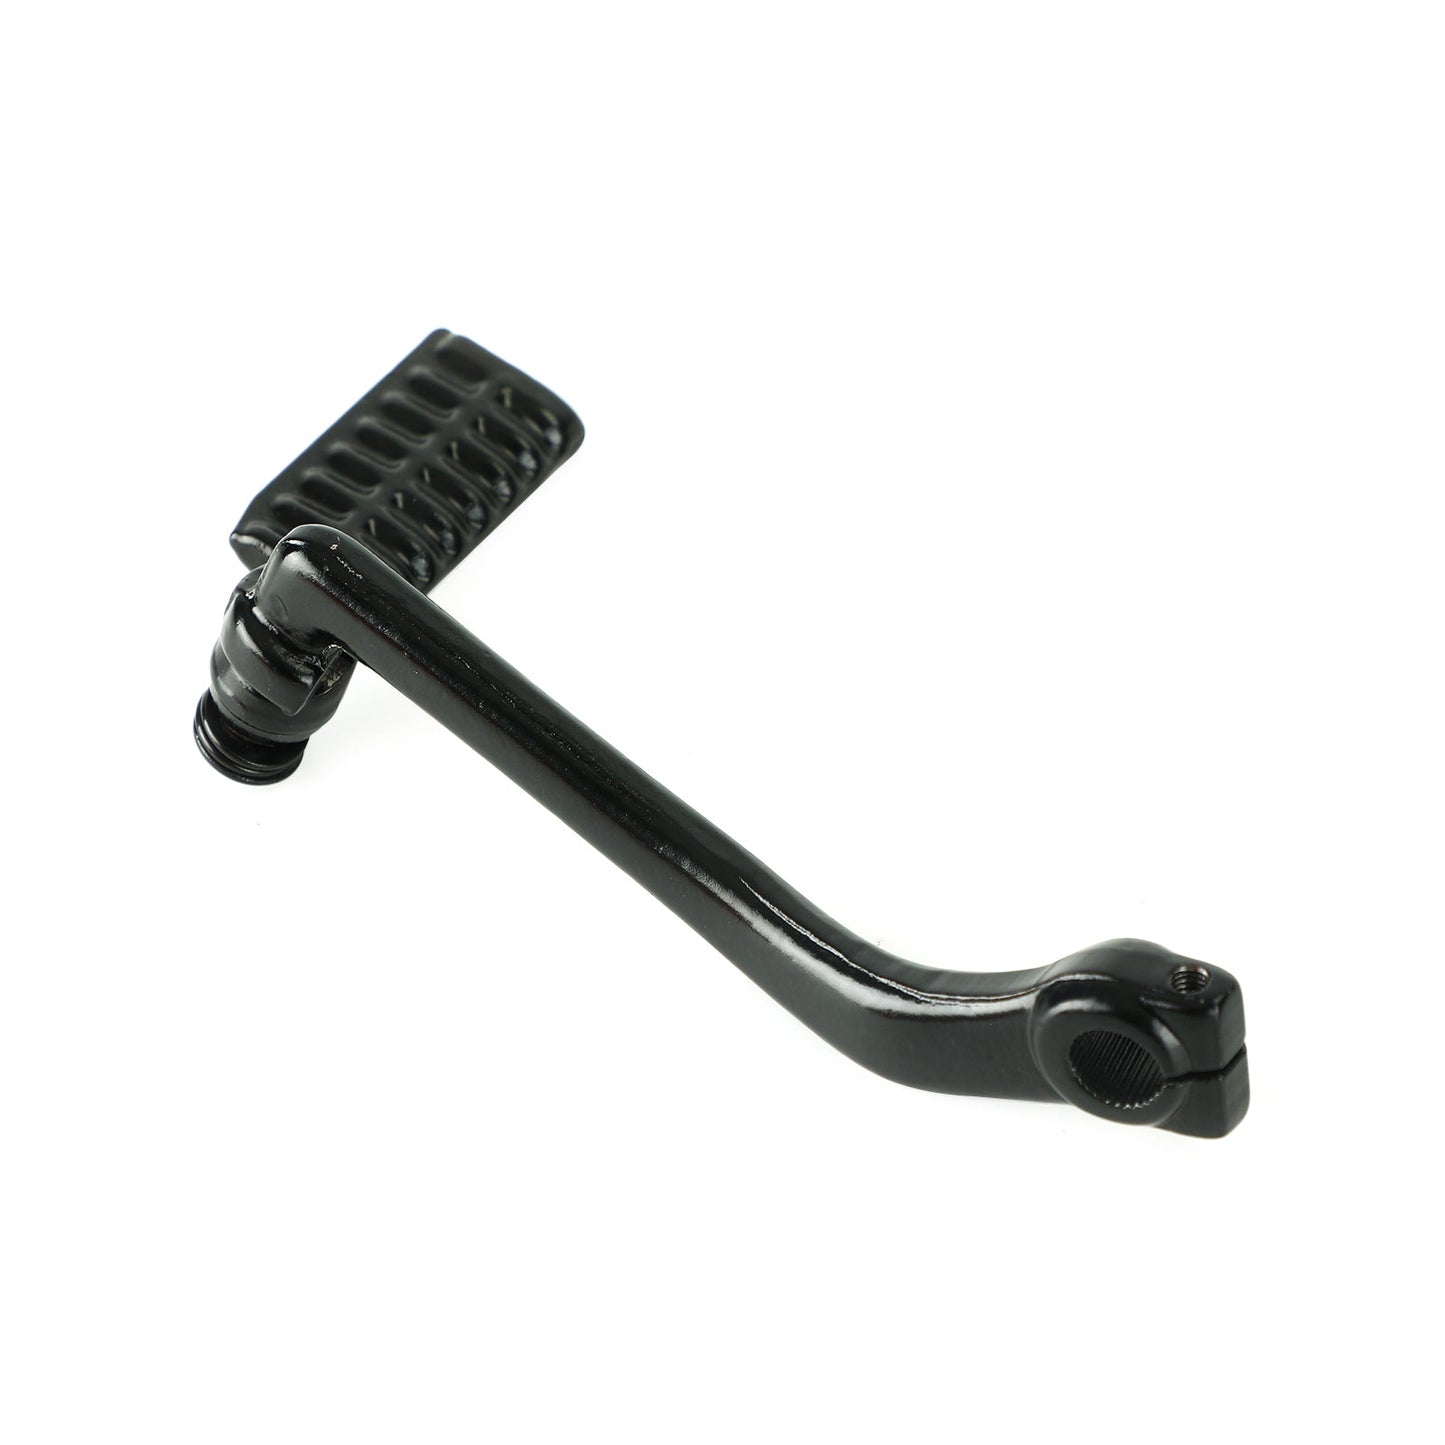 13Mm Diameter Kick Start Levers Black For Gy6-125 Gy6-150 Gy6-157 125Cc 150Cc